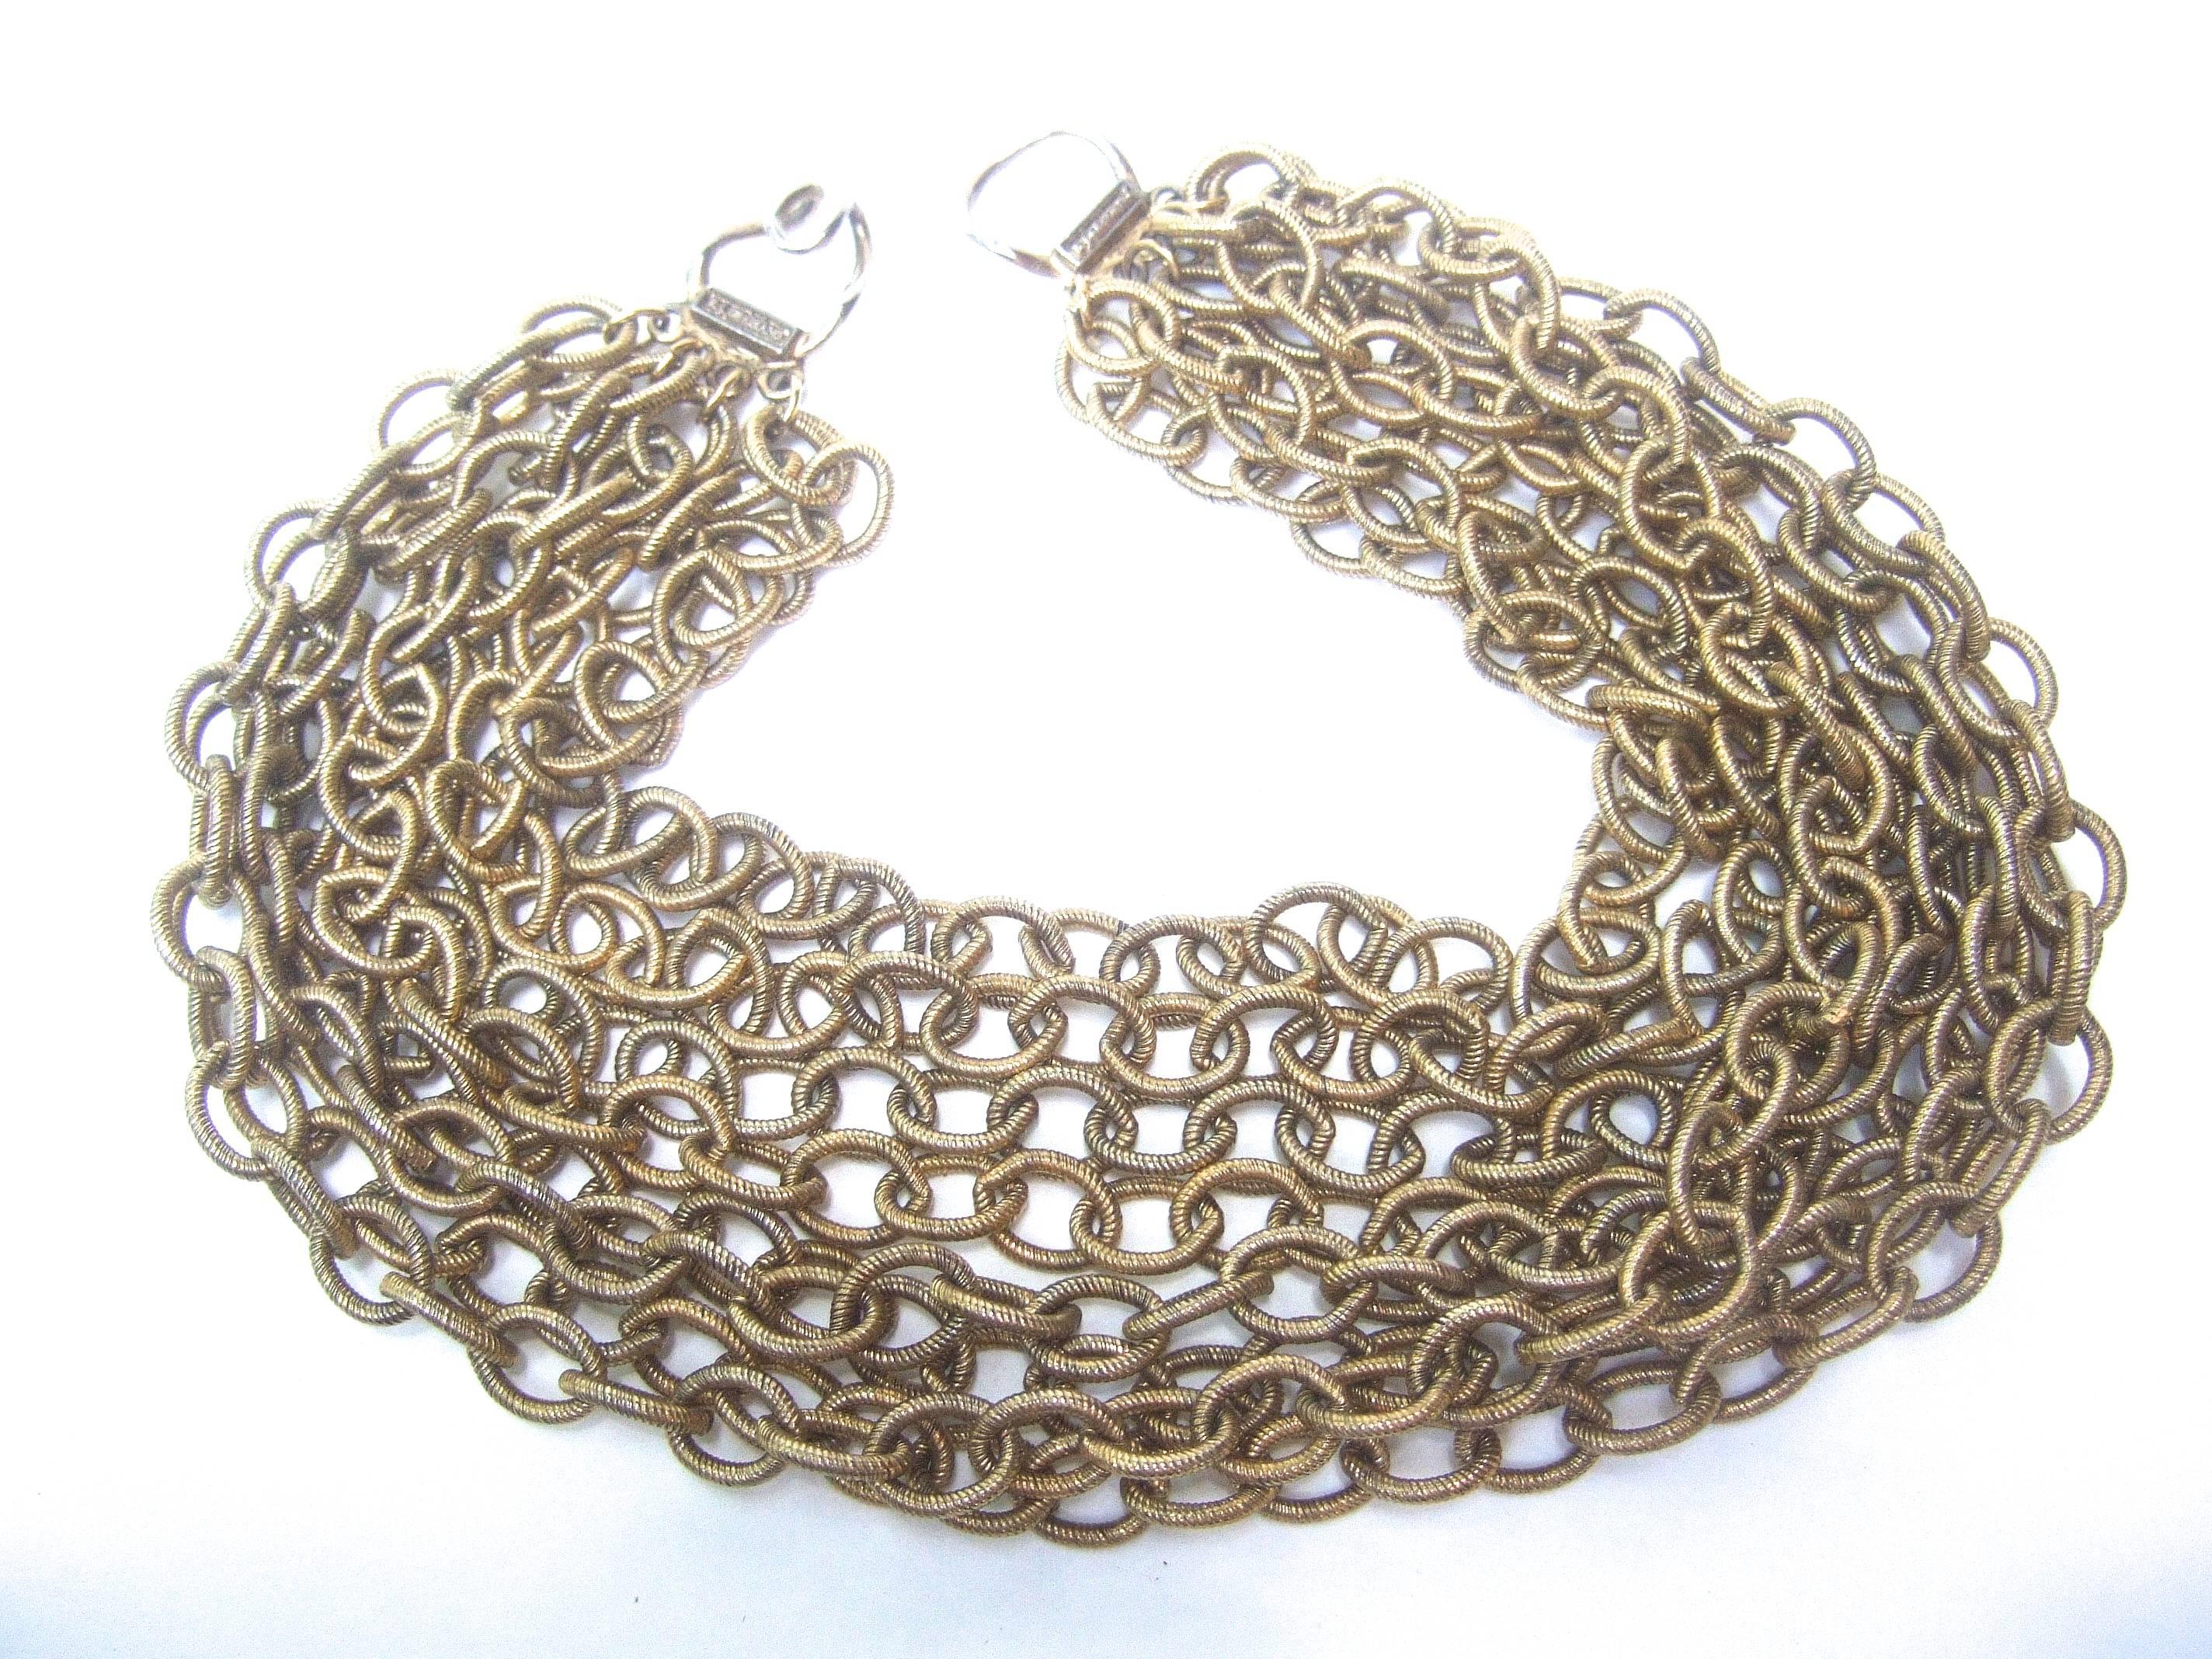 Bold gilt choker chain necklace designed by R J Graziano 
The stylish choker necklace is designed with eight rows
of heavy gauge wide oval link gilt metal chains 

The rows of gilt chains have a subtle grooved design  
with a matte gilt metal